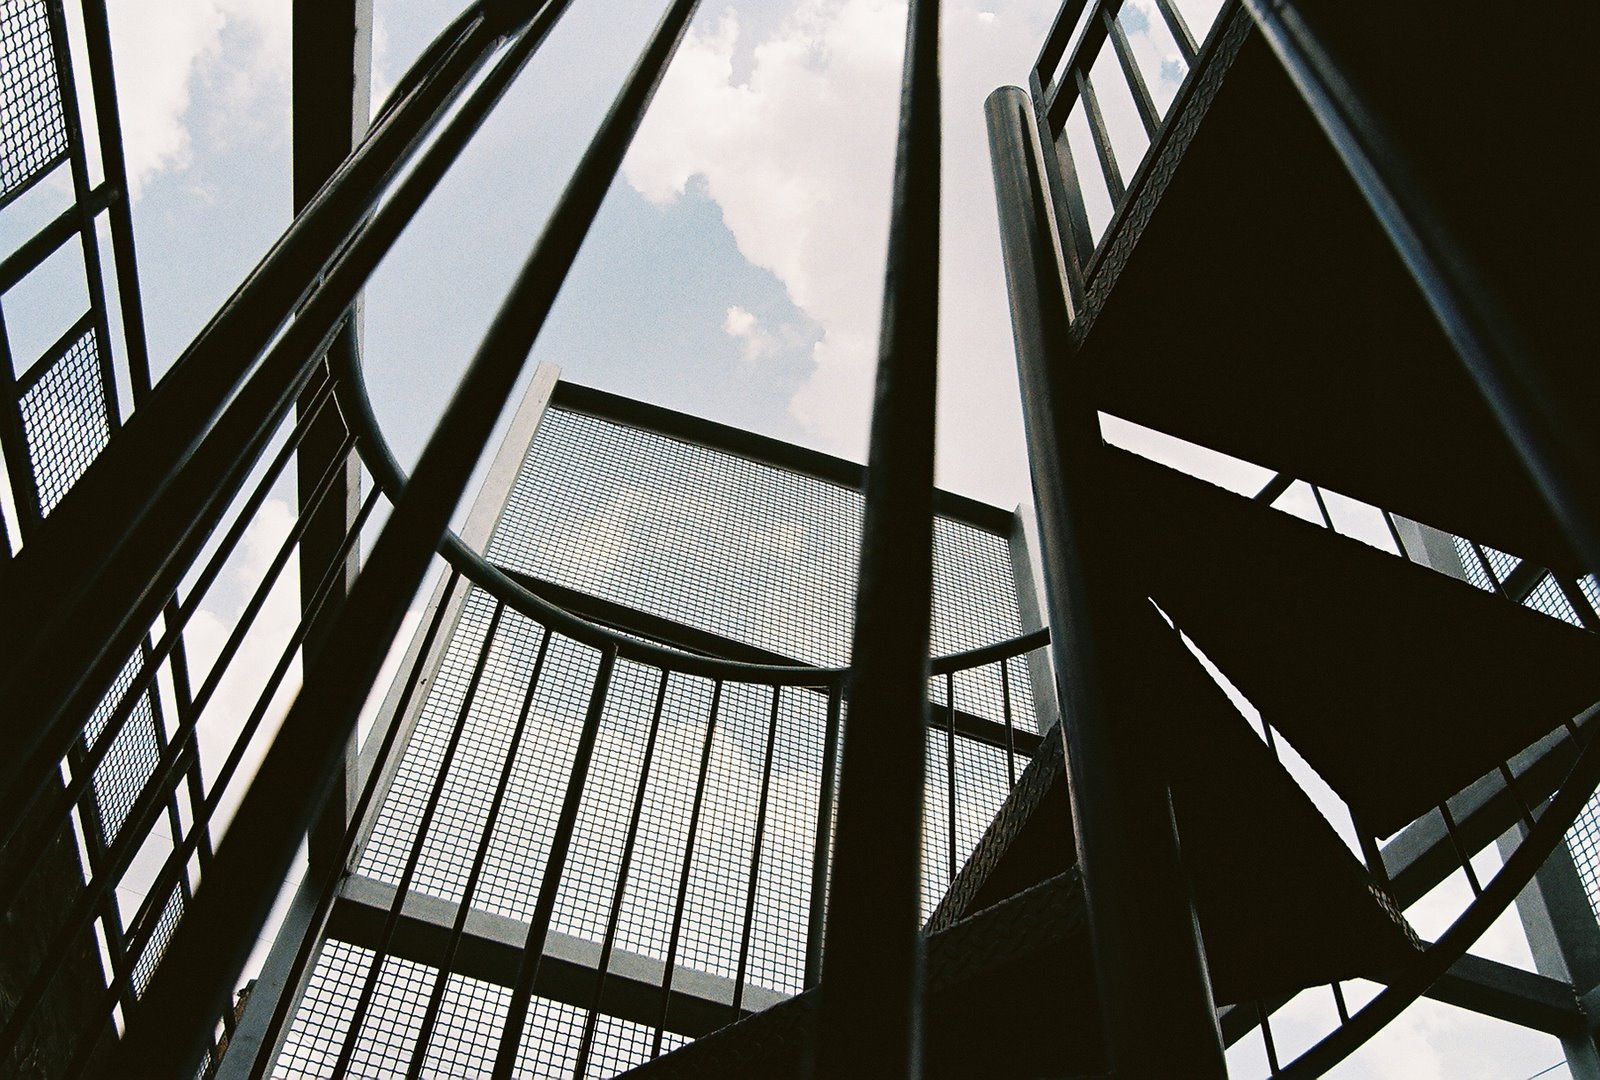 [Looking+up+the+Spiral+Staircase.JPG]